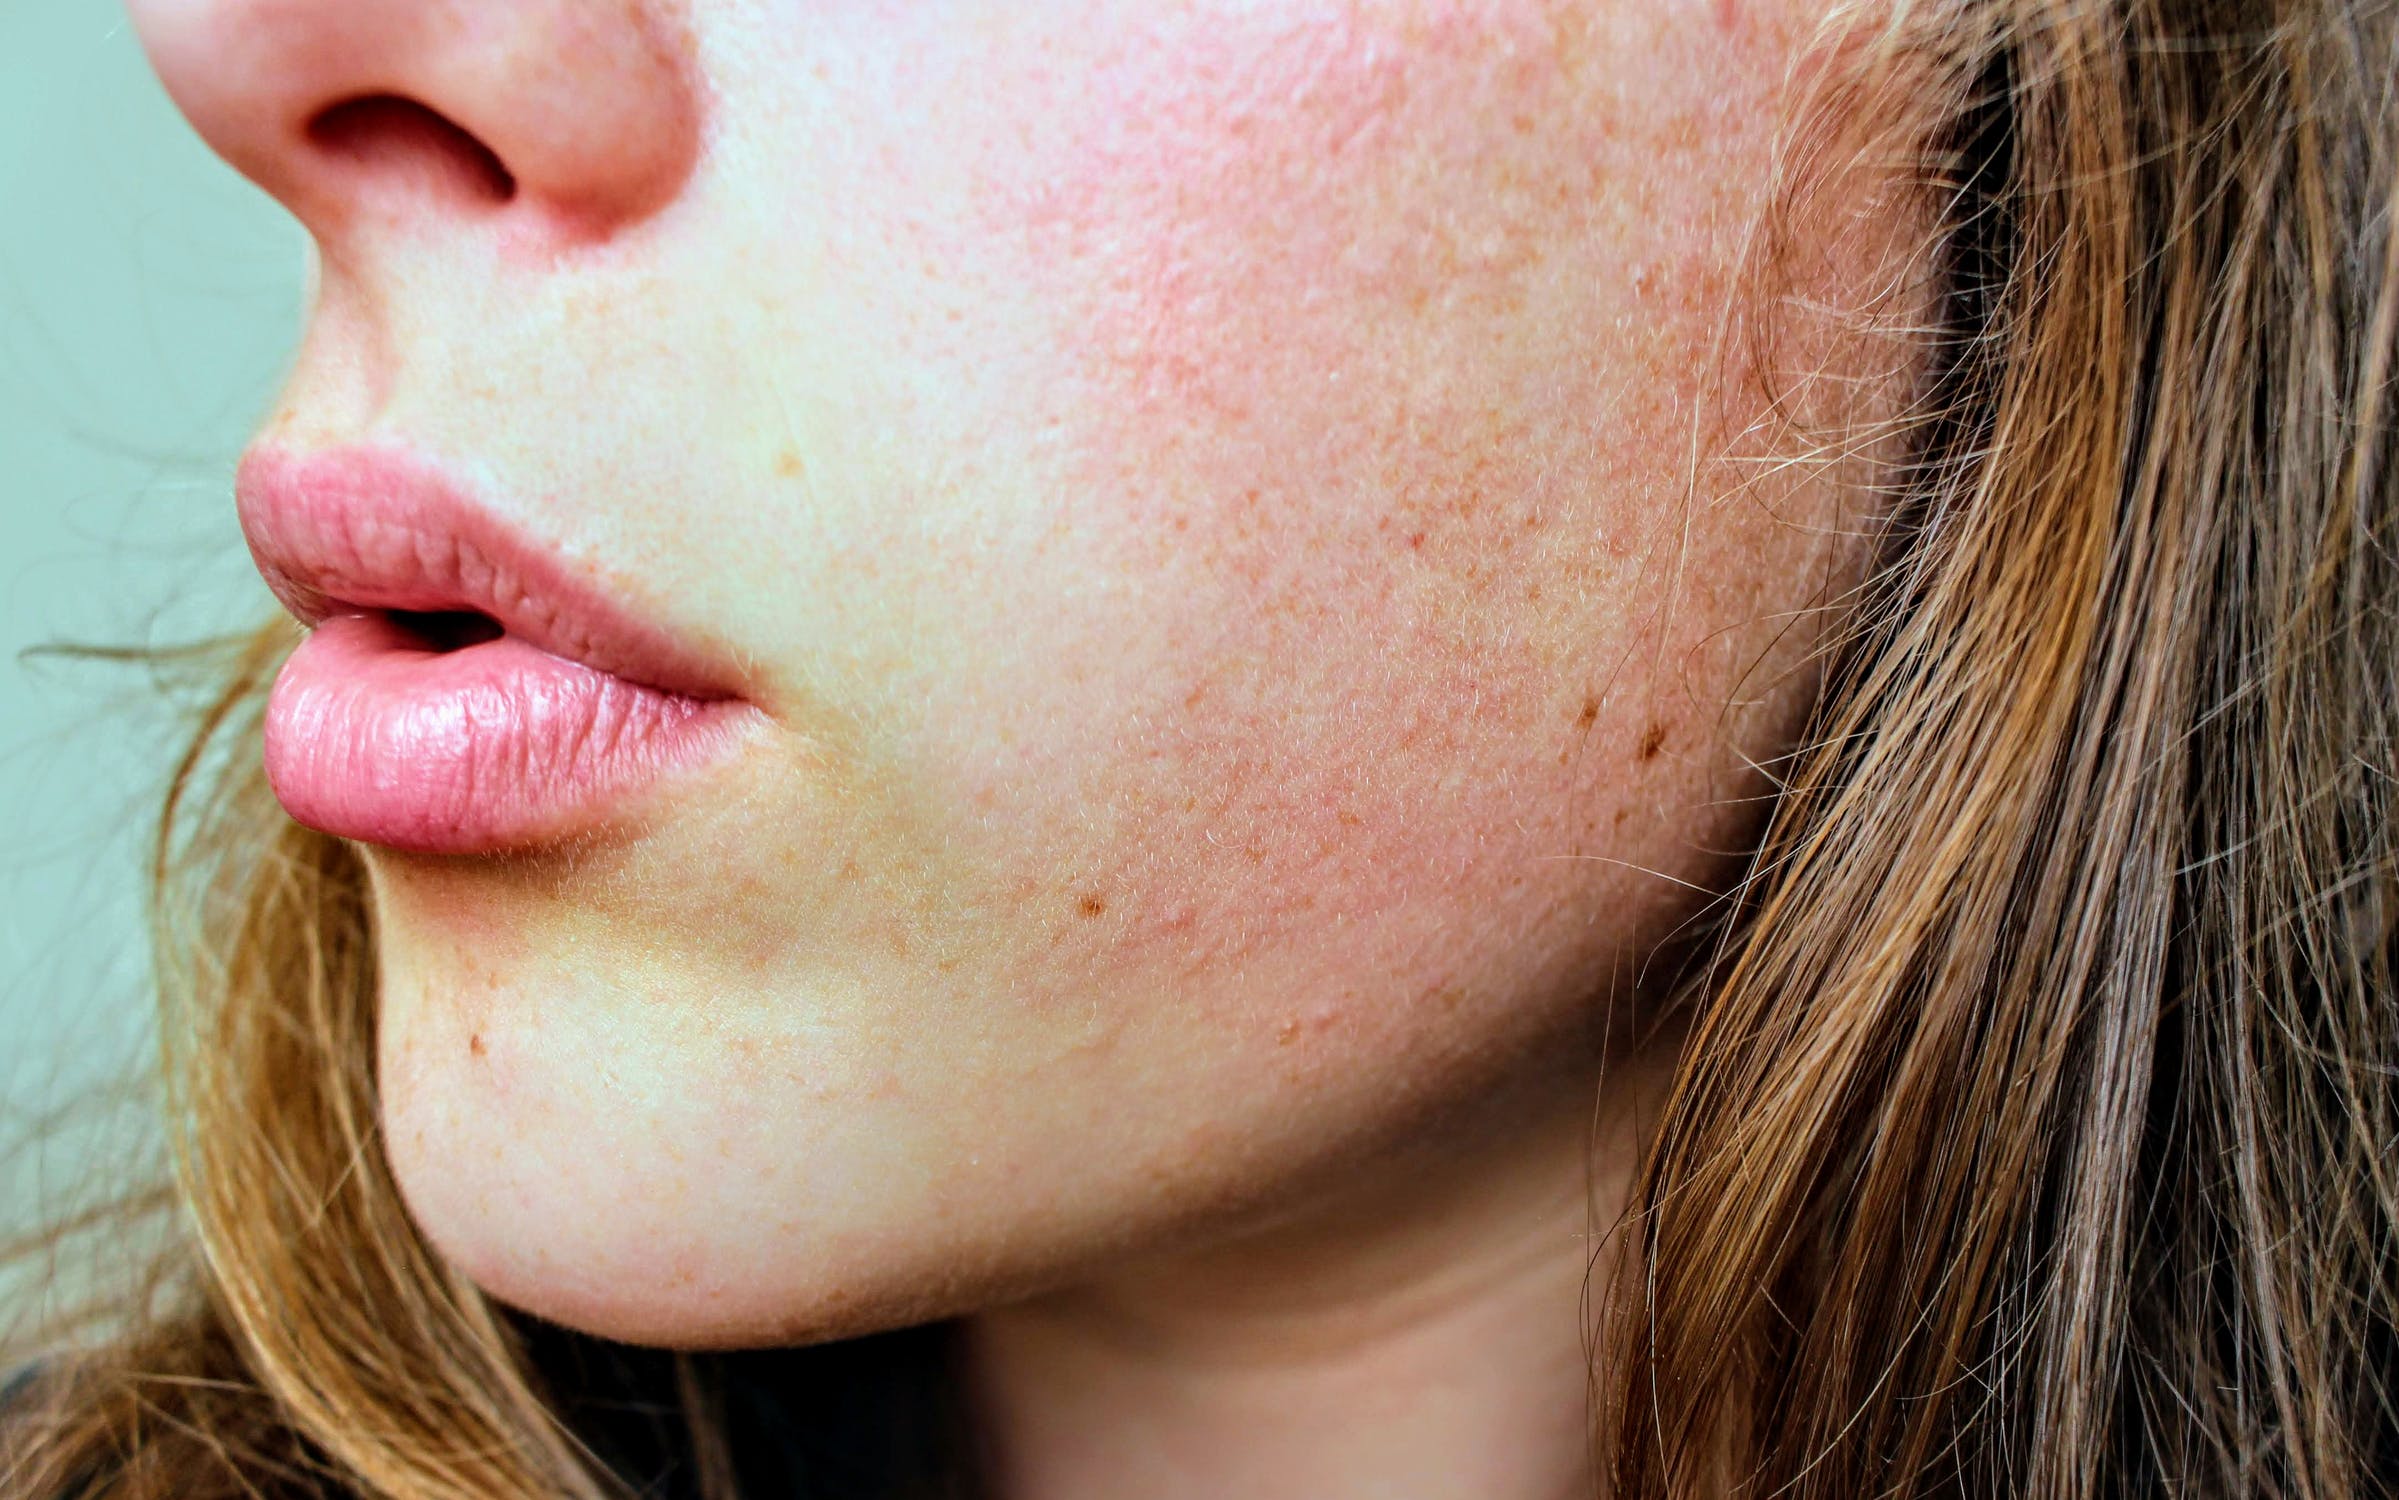 All you need to know about Eczema